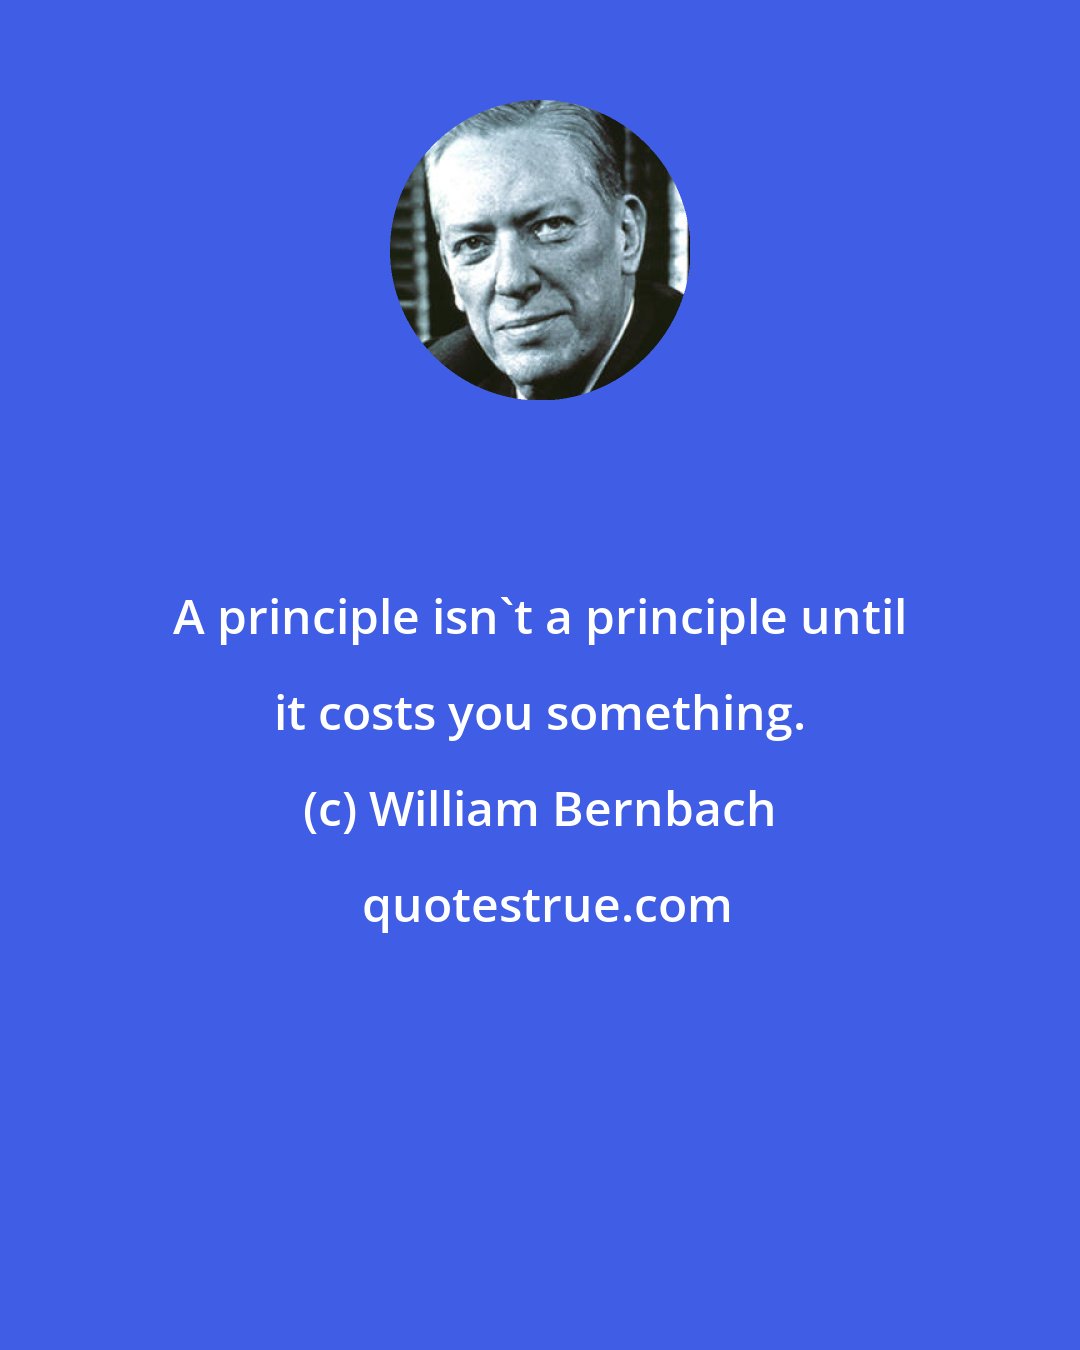 William Bernbach: A principle isn't a principle until it costs you something.